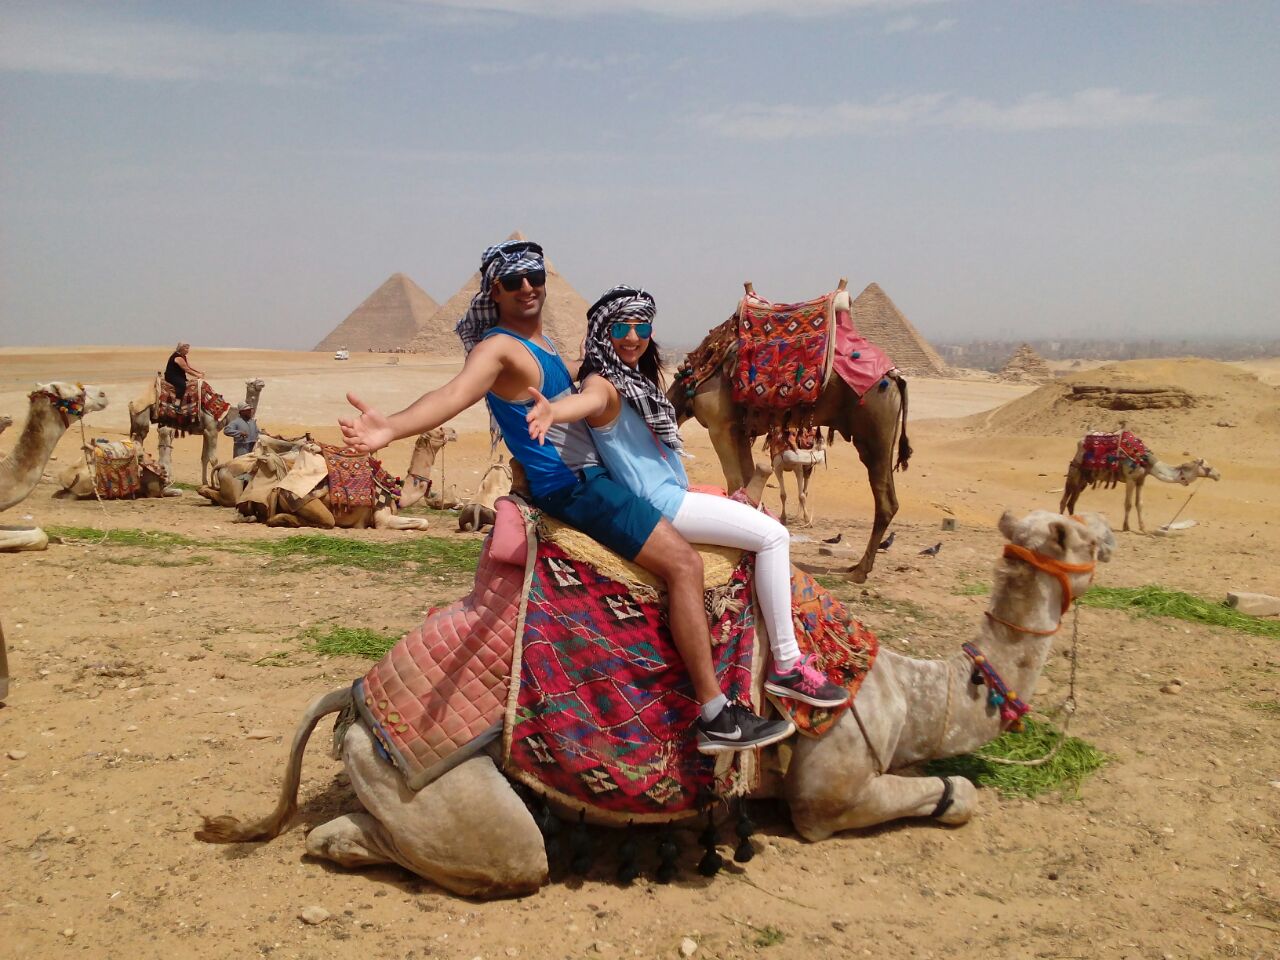 Day Tour to Cairo from Luxor by Flight